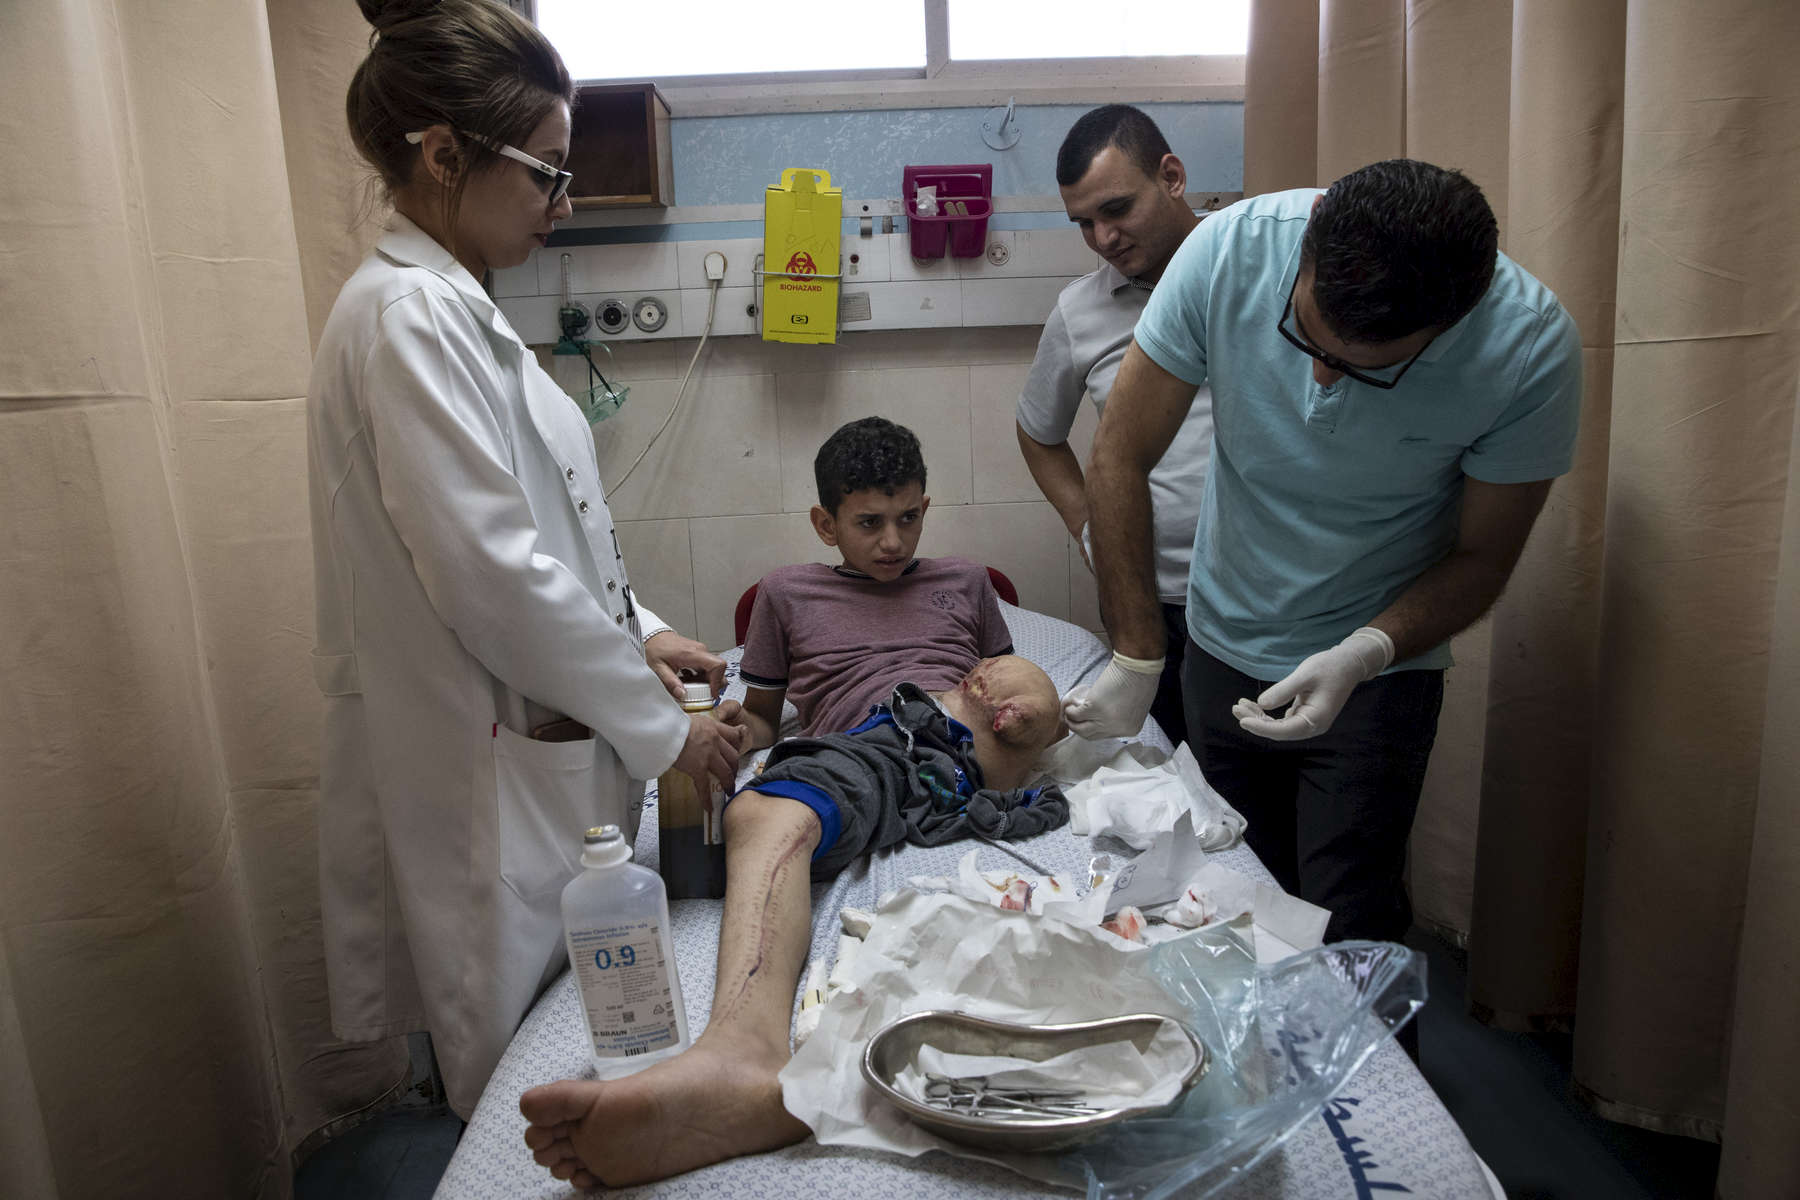 GAZA CITY, GAZA STRIP- MAY 29,2018 Abdullah Al-Anqar, 13, gets medical treatment for his amputated leg at the Al-Shifa hospital on May 29,2018 in Gaza city, Gaza strip. He was shot by twice in his leg at close range with explosive bullets, one in his upper thigh and the other under his knee on May 3rd. He was climbing the Israeli border fence when he was severely injured. The Israel soldiers decided to see his life, dragging him through the border fence, then he was flown to Soroka hospital in Beer Shaba, Israel where he spent 16 days in Intensive care, his leg was amputated there as well. The Israeli military (IDF) started using new weaponry, explosive bullets that shatter bones, tissue, destroying veins and arteries, the aim is to create a handicapped community, especially amongst the young male population. Many of the wounded protesters have to undergo multiple surgeries to try to save their limbs, and in some cases amputation is the only solution. Everyone is well aware that Gaza's two million inhabitants are trapped in a cycle of violence and poverty, created by policies and political decisions on both sides. The problems and complications affecting Gaza today are overwhelming. The world, seemingly accustomed to the suffering of the Gazan people turns a blind eye. (Photo by Paula Bronstein ) 